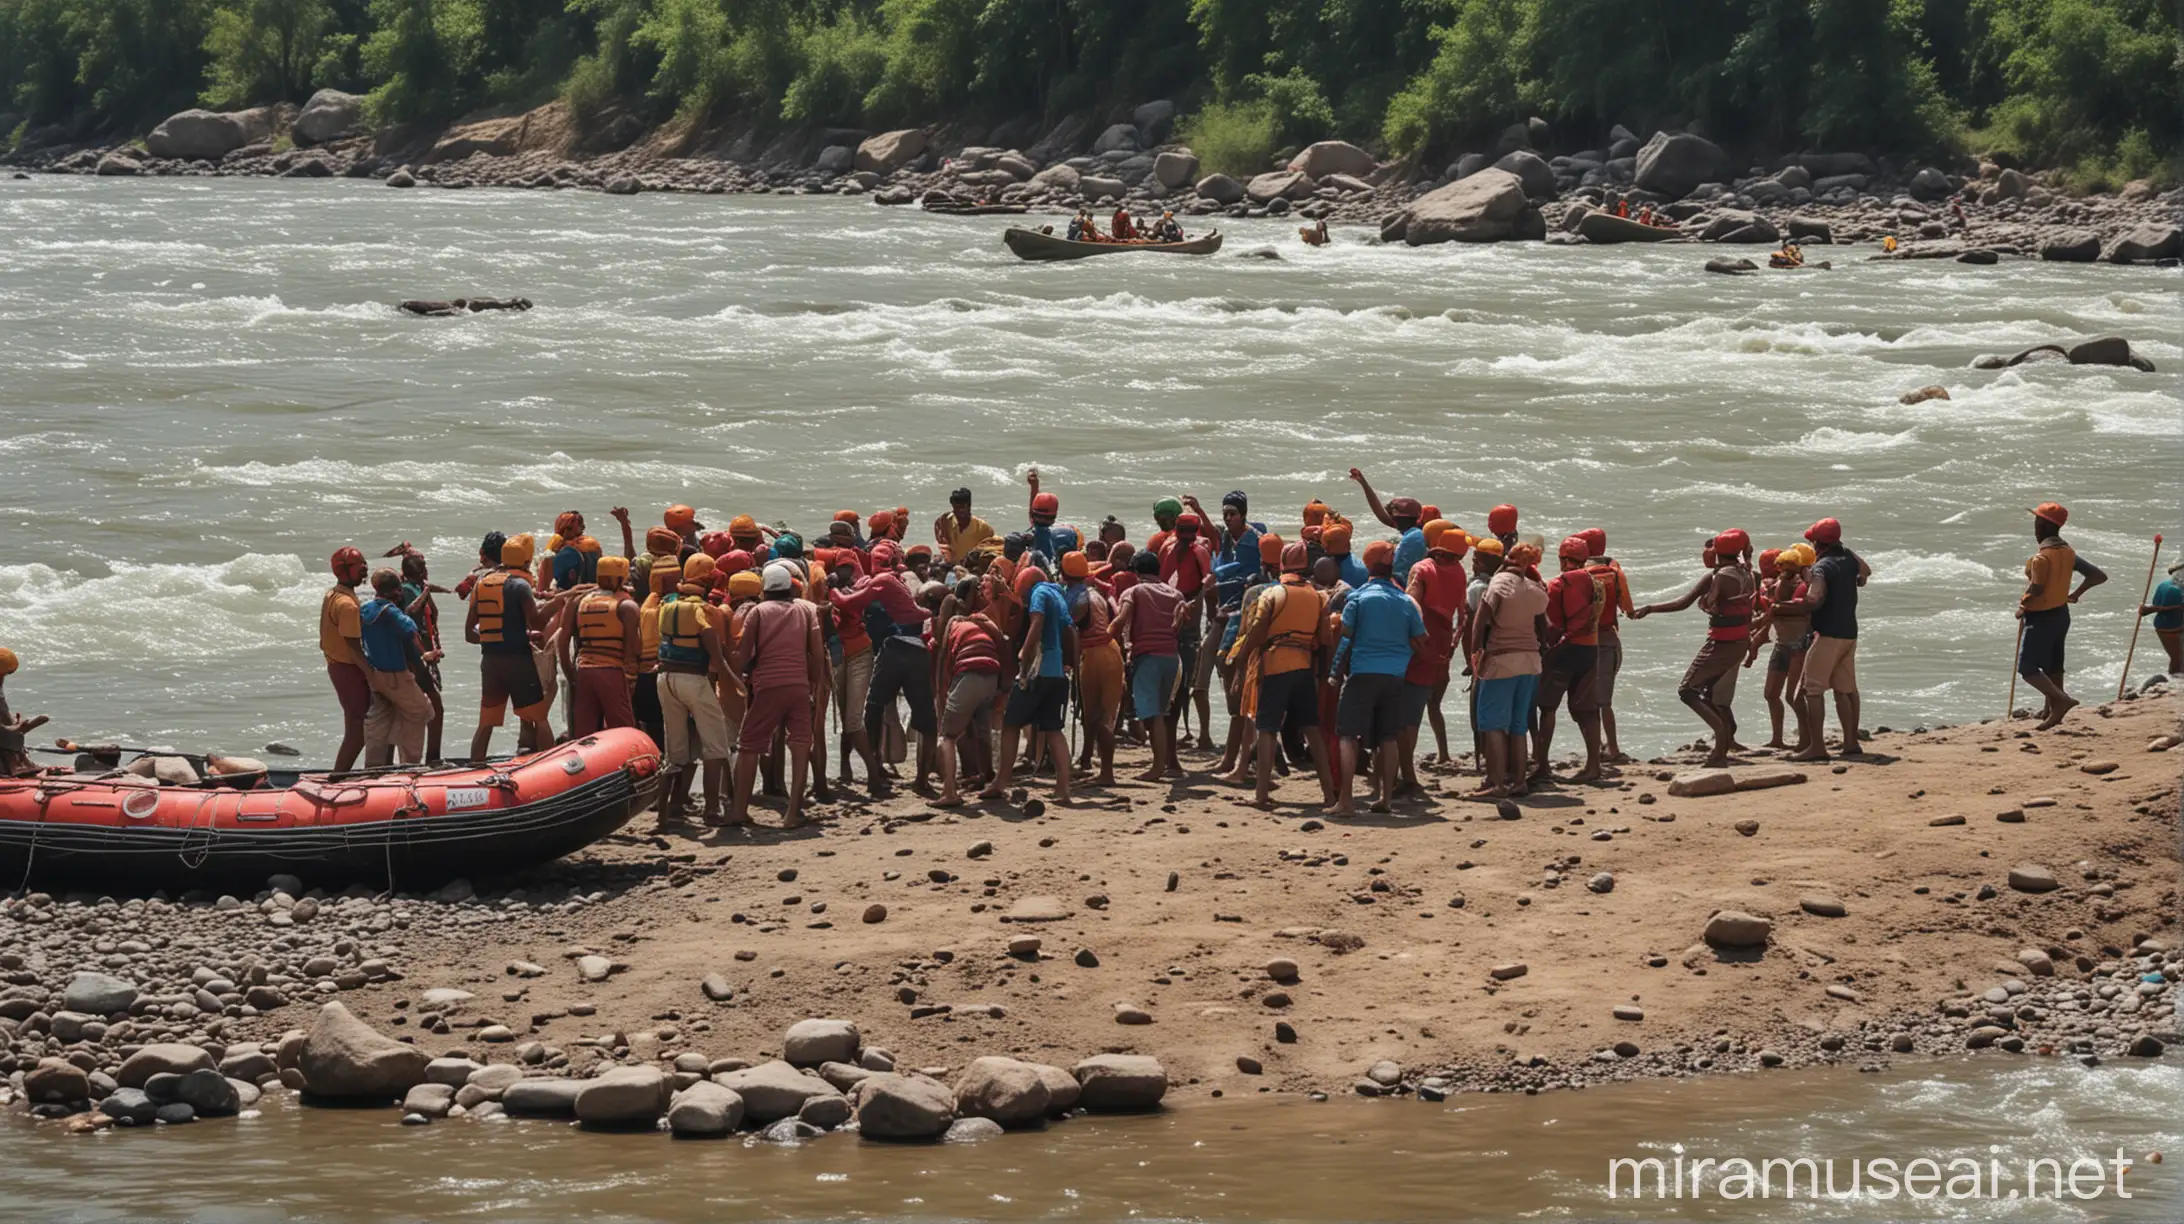 Some Indian people wear afting attire are beating each other near the rafting boat on the river bank, people are gathered near bank